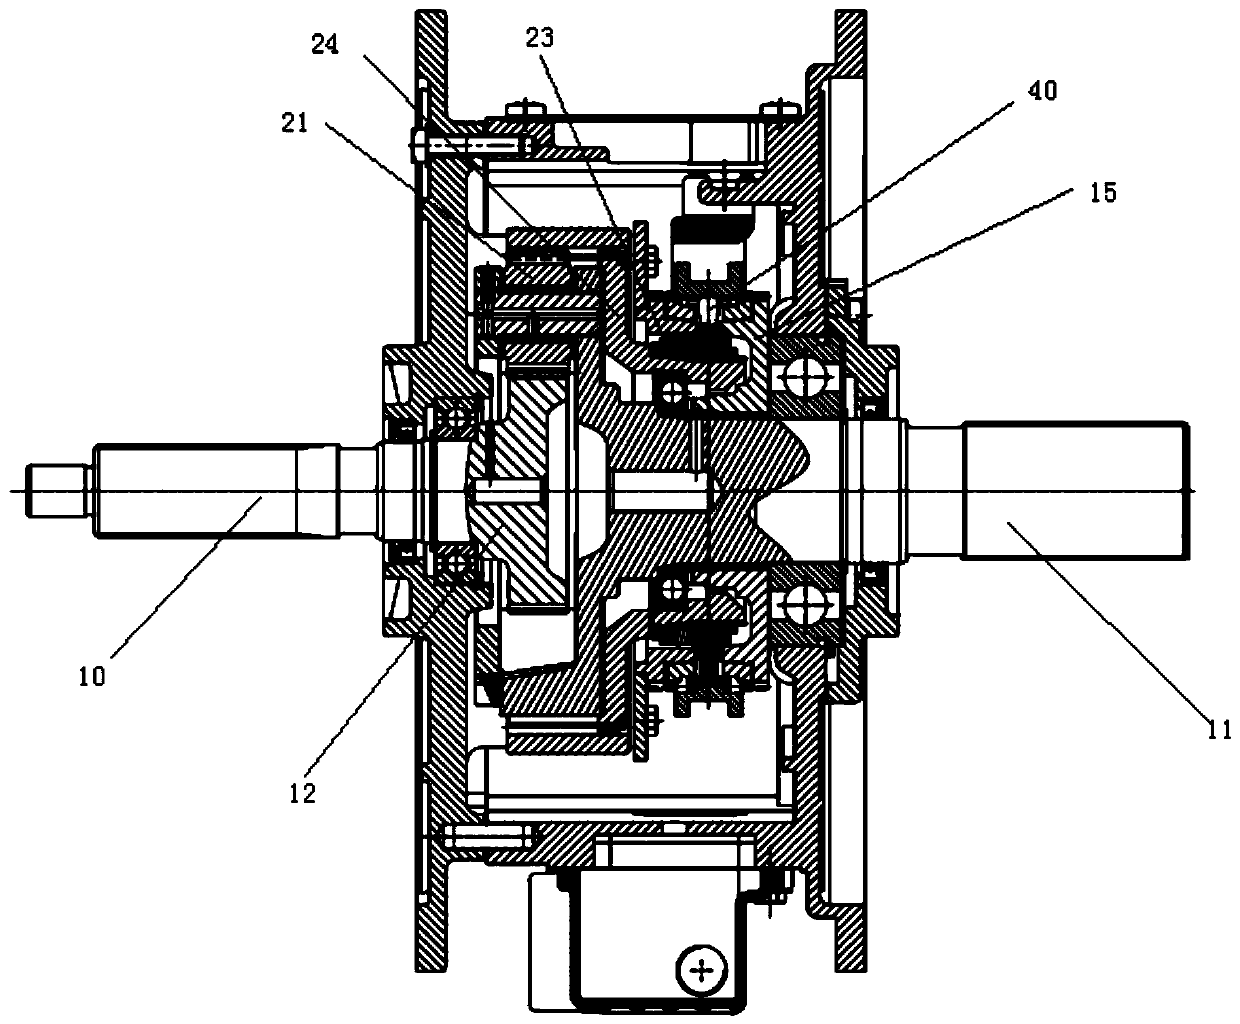 Integrated planetary mechanism two-gear transmission